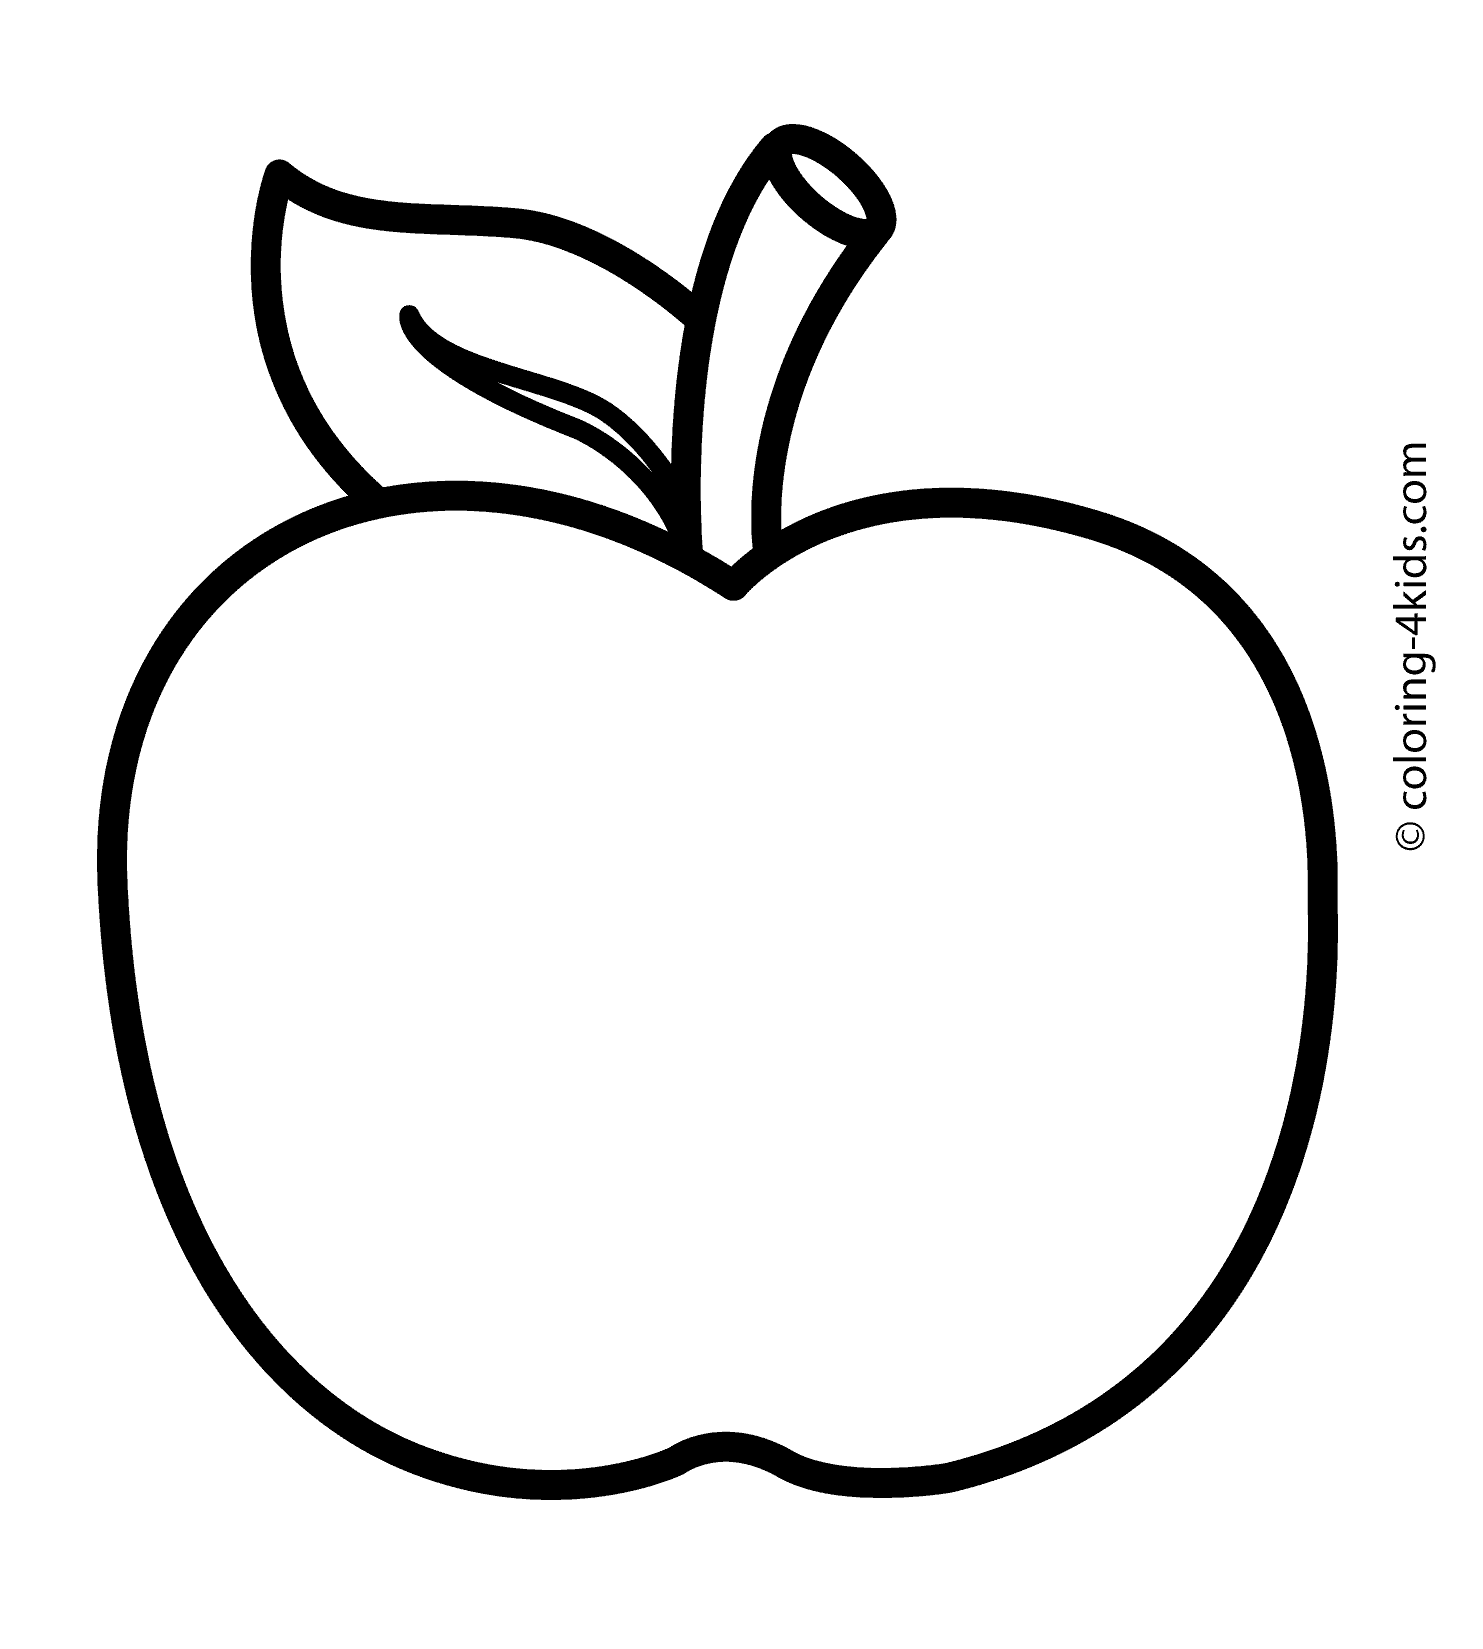 Apple Fruits coloring pages nice for kids, printable free